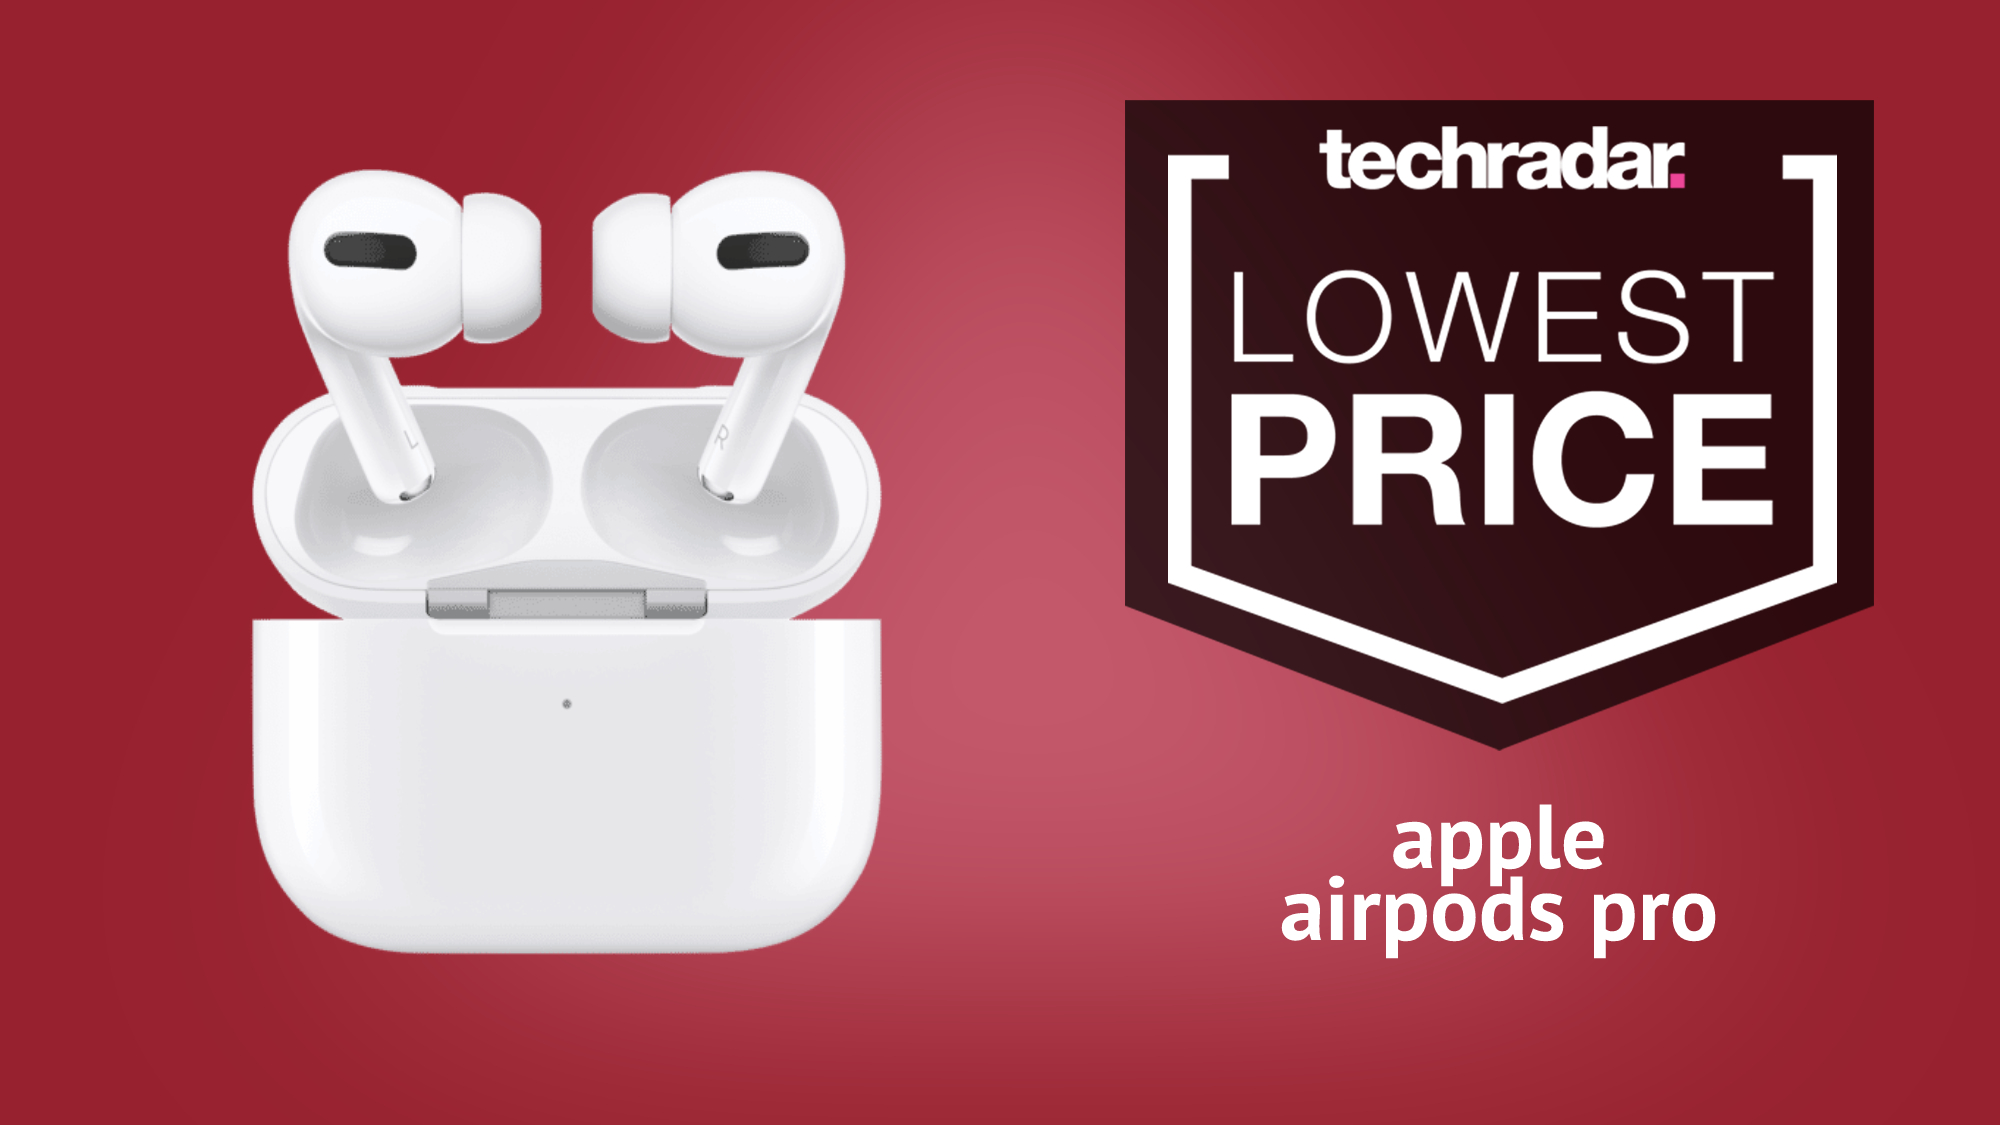 Apple AirPods Pro Black Friday deal